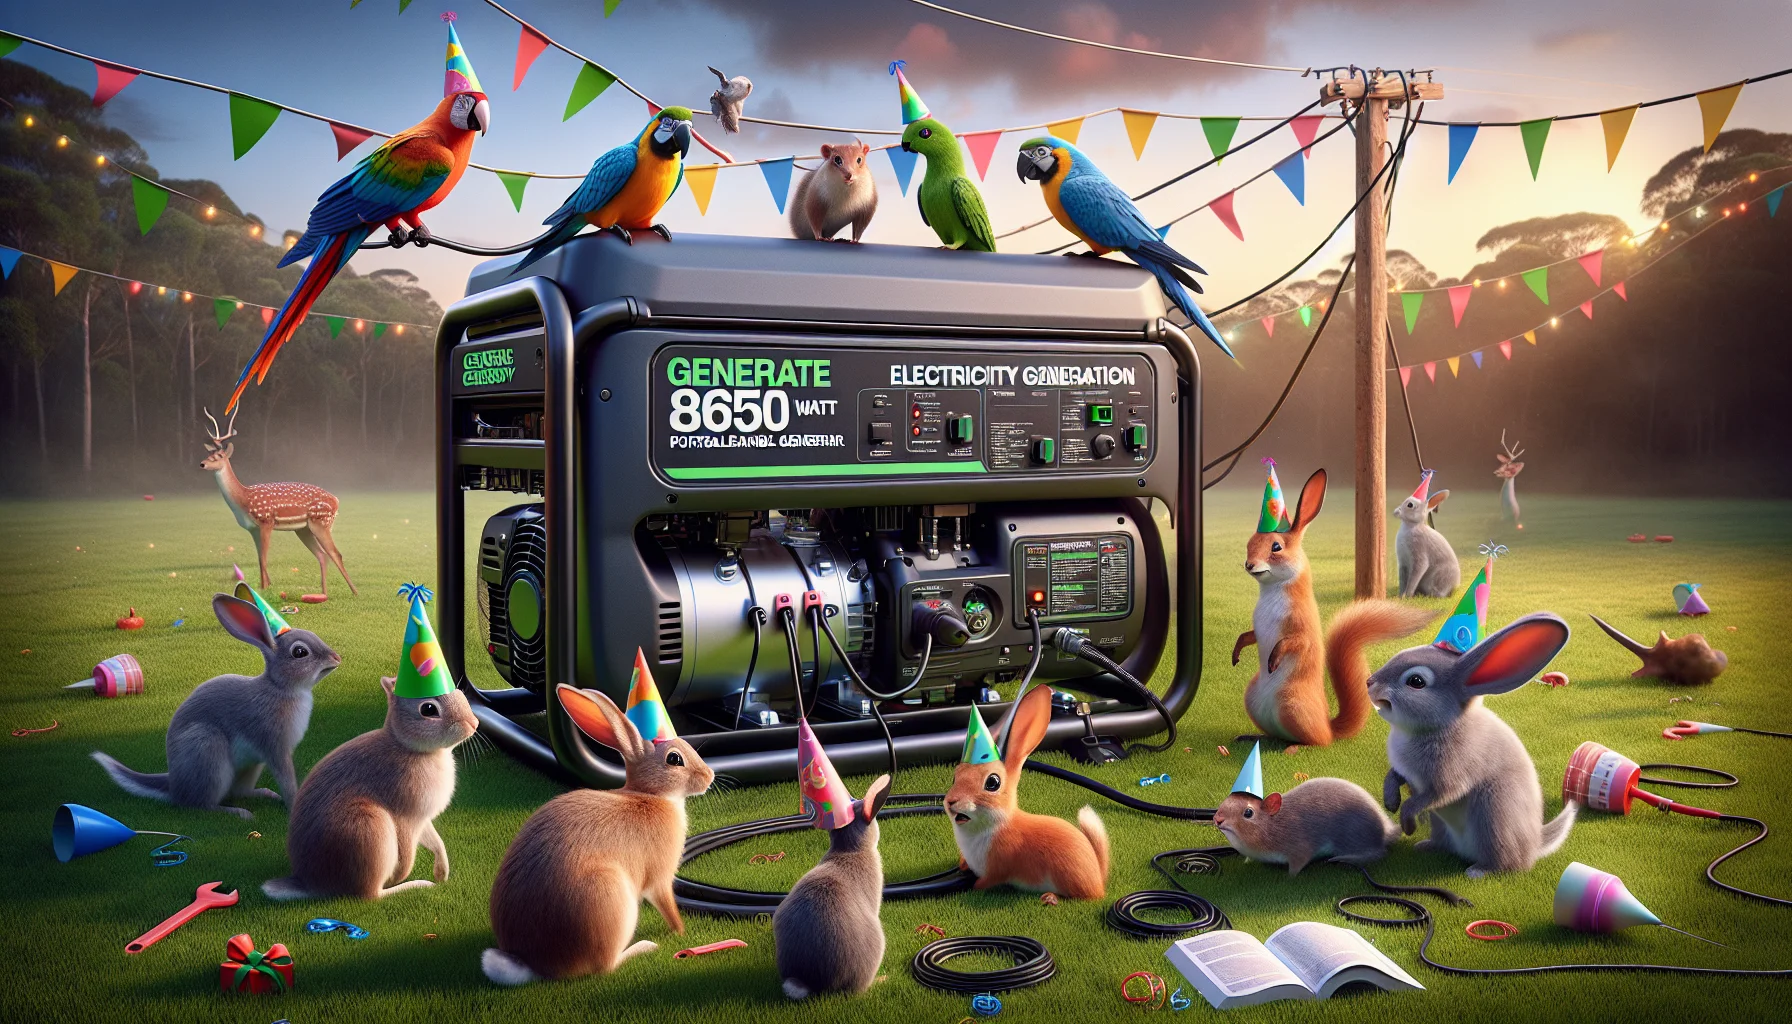 Generate a realistic image showcasing a large 8750 watt portable generator in a humorous scenario that encourages people to generate their own electricity. The generator is placed on a lush green lawn, surrounded by cute animals like rabbits and squirrels in party hats, seemingly preparing for a festivity. On the right, a flock of brightly colored parrots is trying comically (and failing) to operate the generator start button. On the left, a couple of bemused deer are watching the chaos while trying to understand a 'DIY Electricity Generation' manual book. The sky overhead is a lovely shade of twilight, and glows with the promise of upcoming fun.